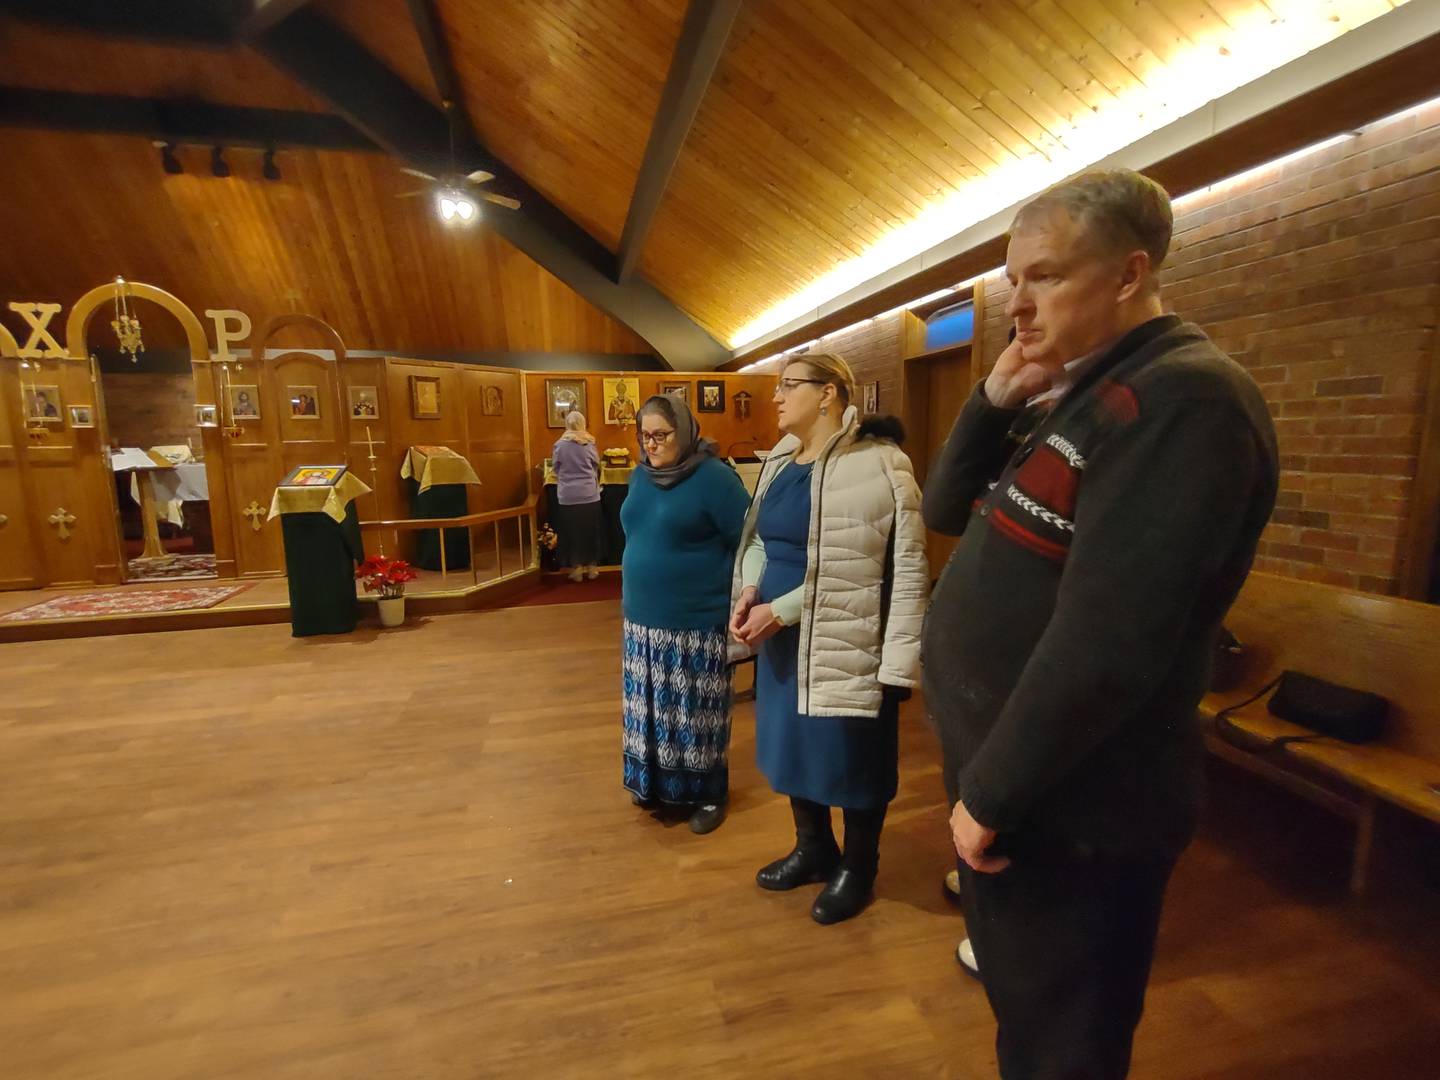 Parishioners at St. Nicholas of Myra Russian Orthodox Church in McHenry, many of whom were born in Ukraine, prayed for peace during service Thursday, Feb. 24, 2022.